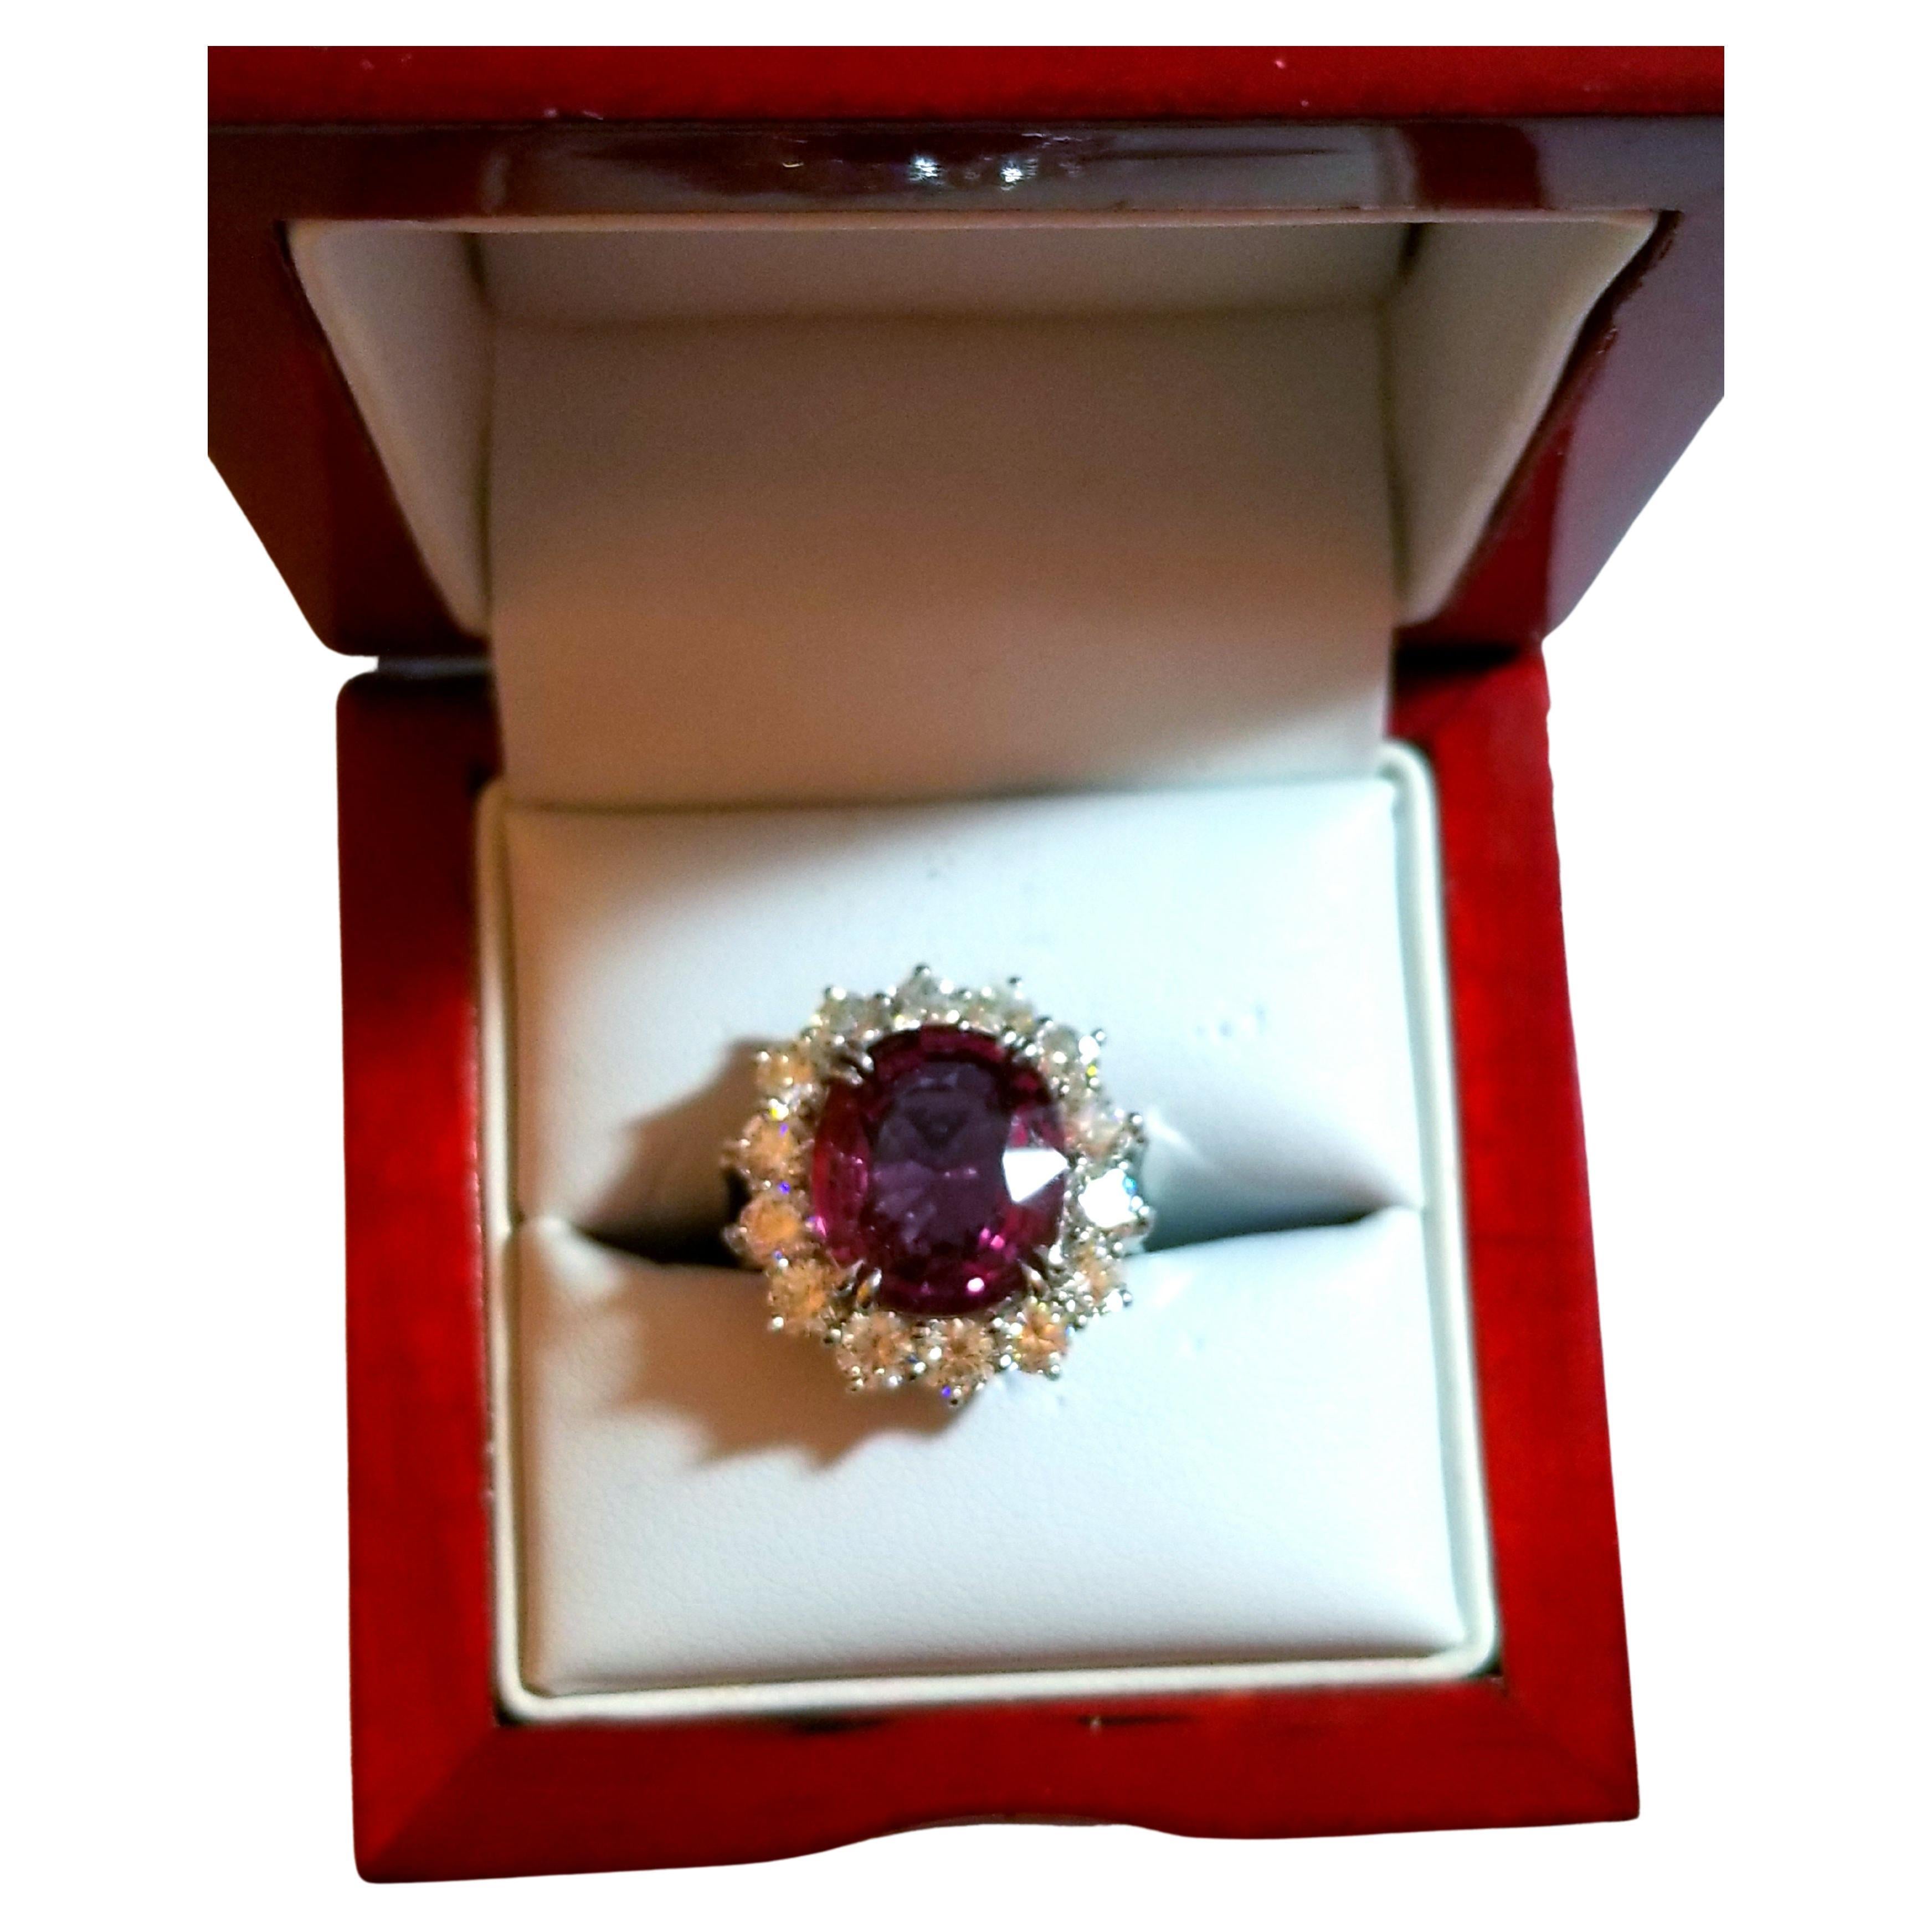 This stunning ring from LaFrancee is a true beauty, featuring a 6.77 CT natural hot pink spinel and diamond accents set in platinum. The ring is in brand new condition, never worn and comes with an AGL certification. The pink spinel is a gorgeous,